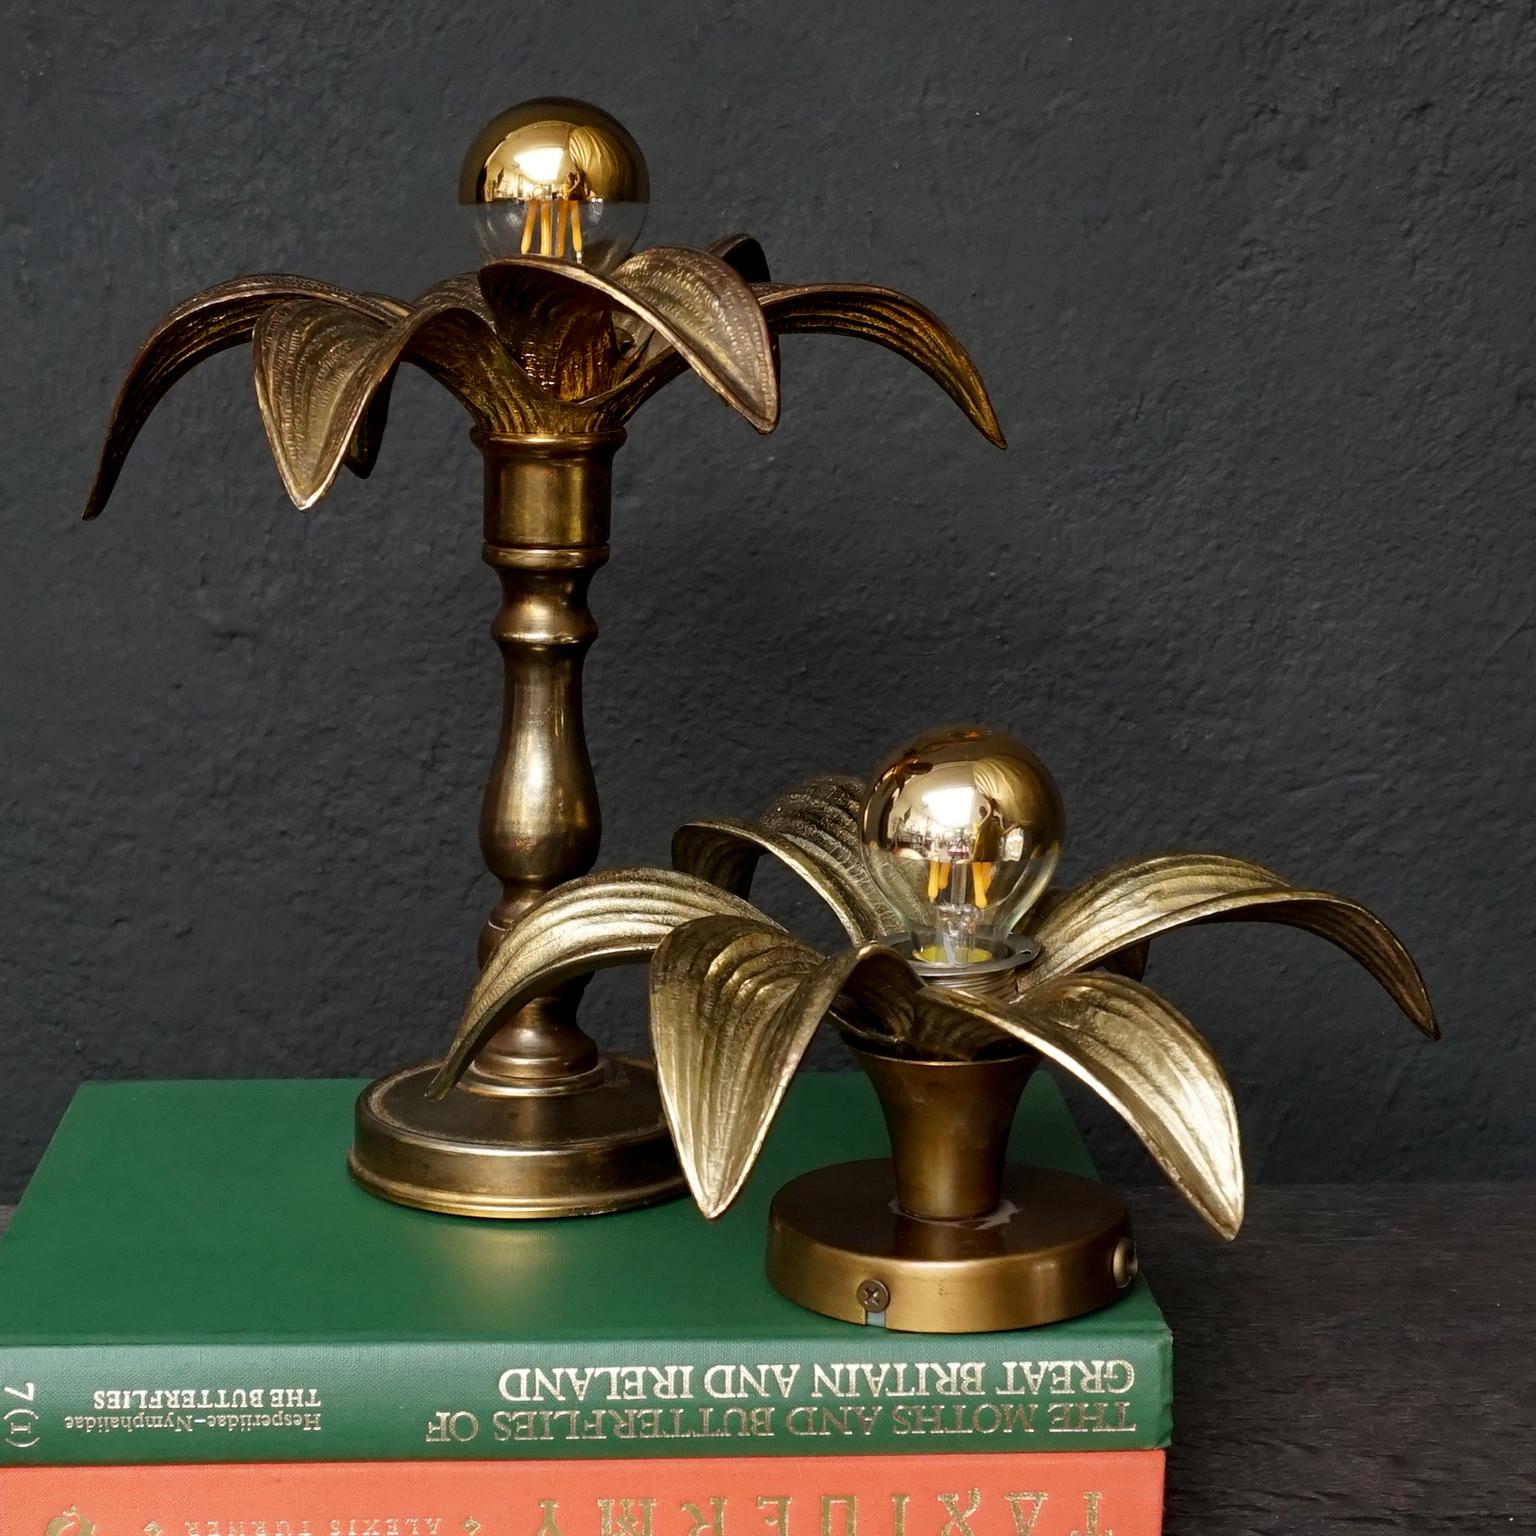 Vintage set flower Willy Daro for Massive lights, each shaped from leaves one connected to a wall plate which also can be placed on a flat surface, the other a table or desk light

As you can see this set of golden flowers have all the glamour of